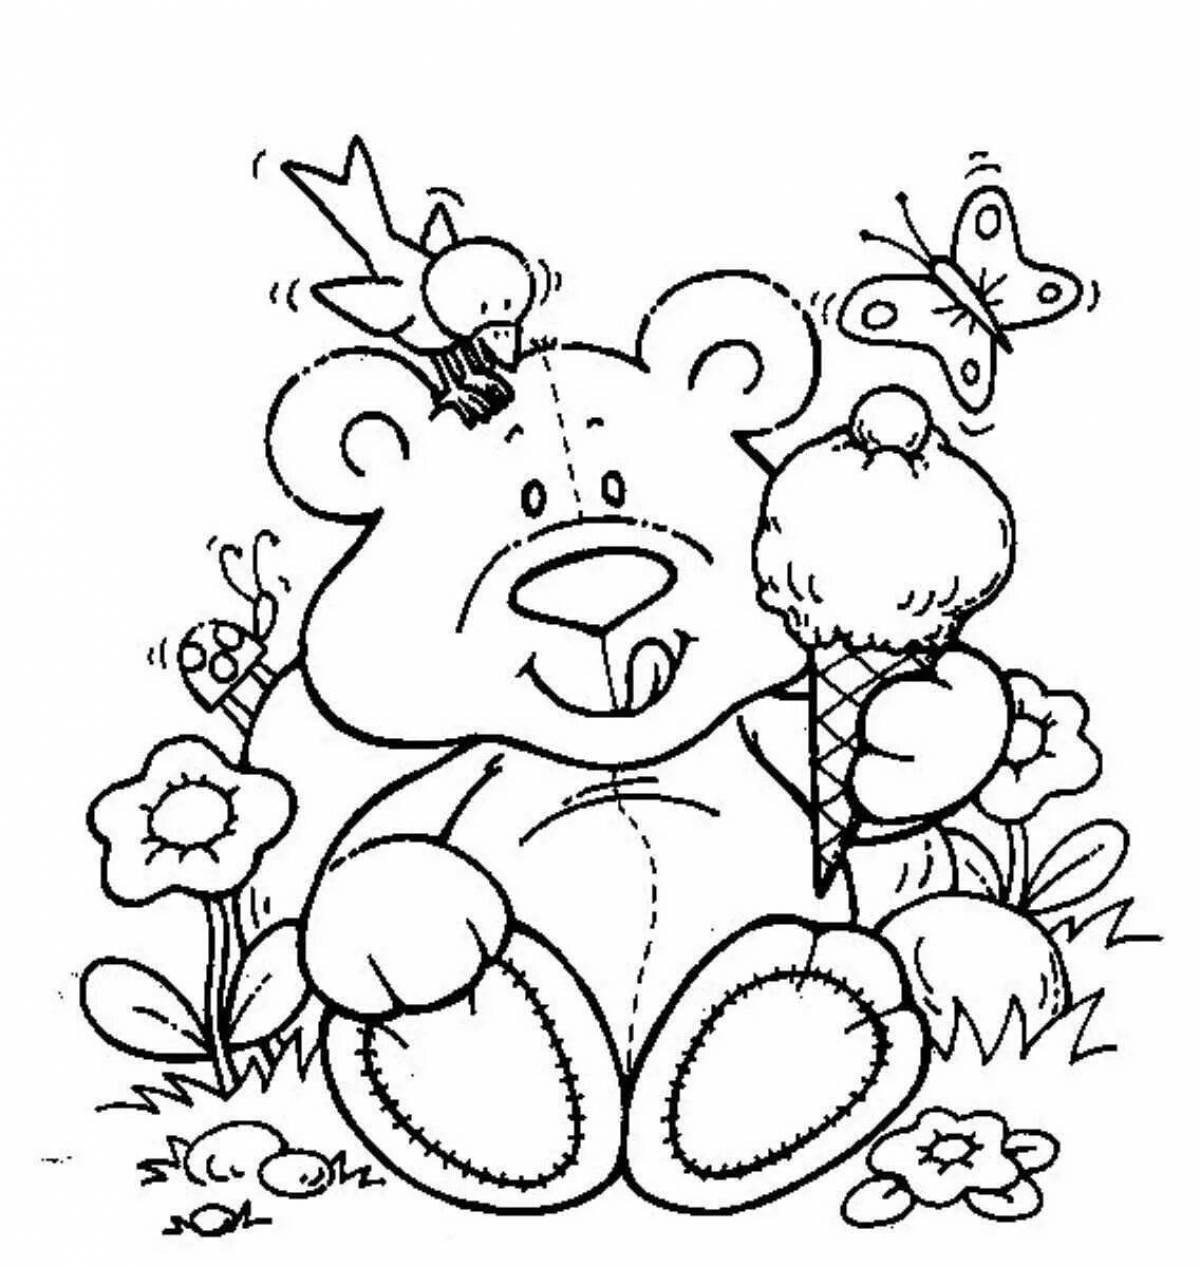 Colorful teddy bear coloring book for girls